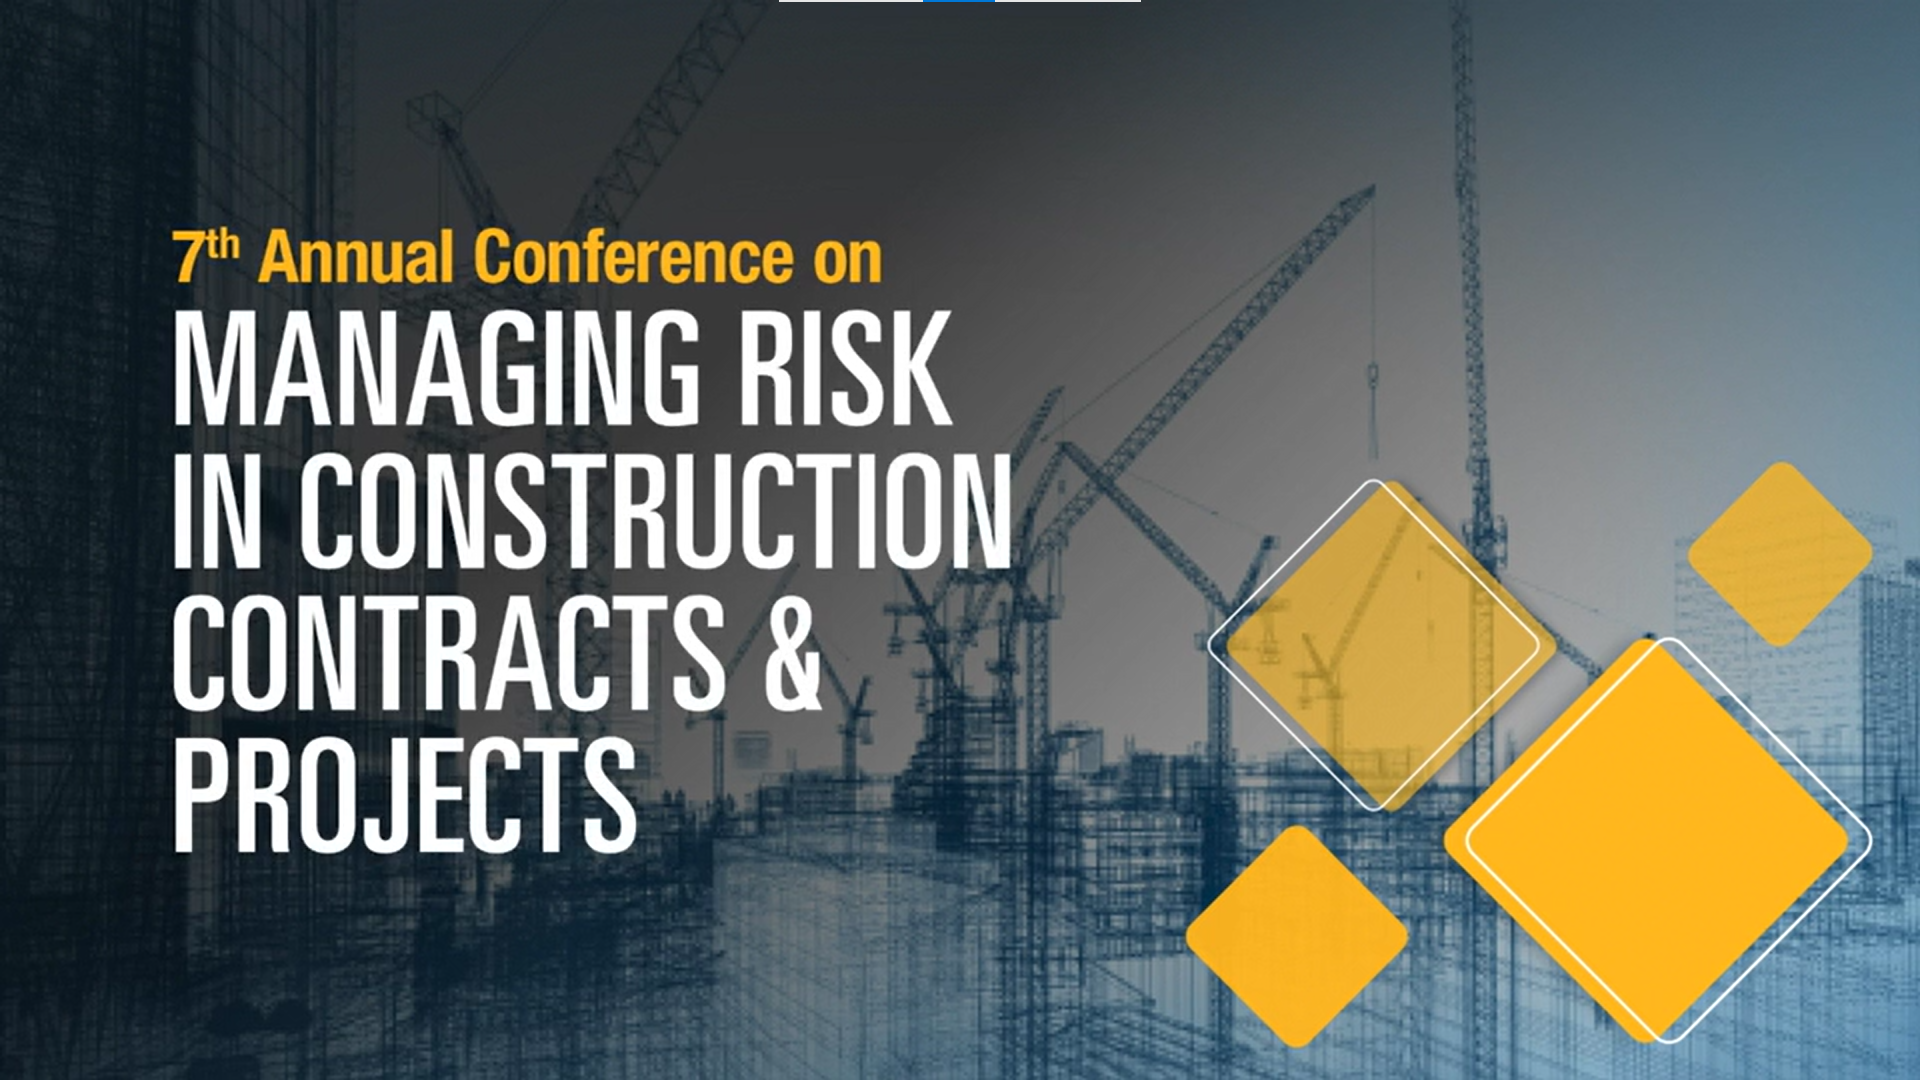 Managing risk in construction contracts and projects conference banner